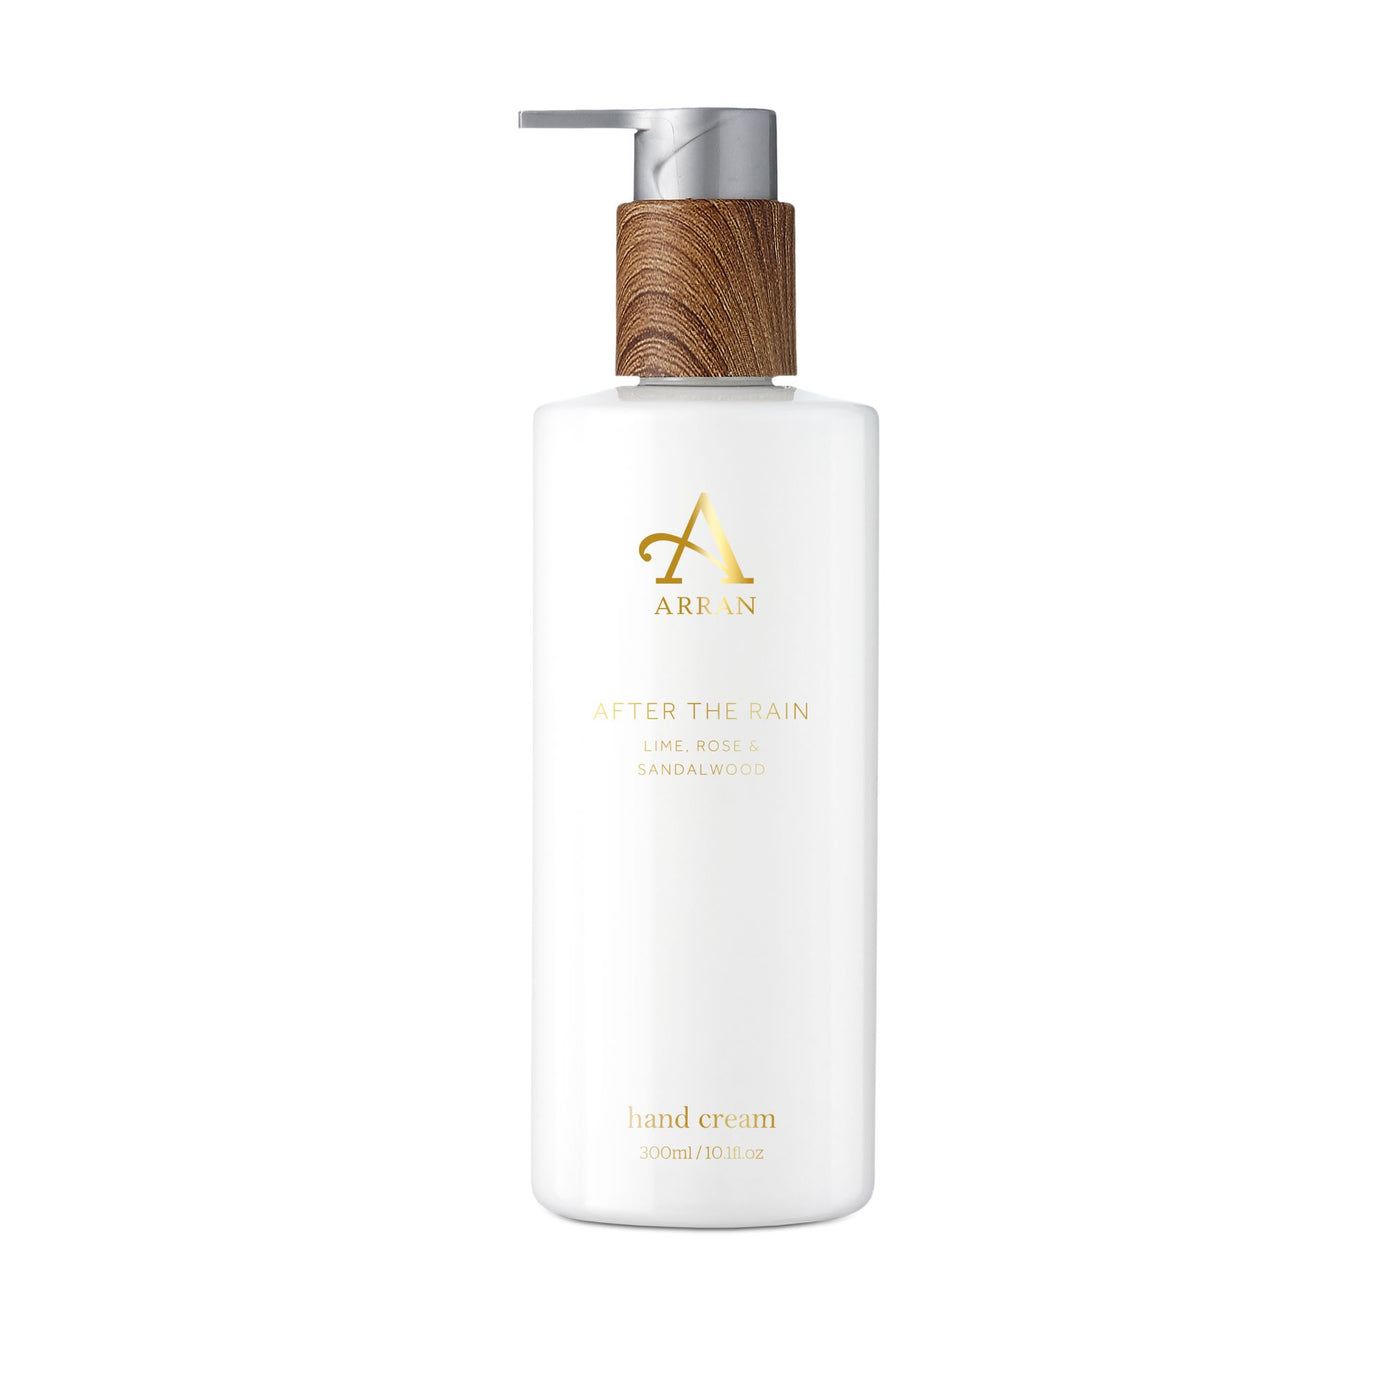 a 300ml pump bottle of thick and luxurious After the Rain hand cream from Arran Sense of Scotland